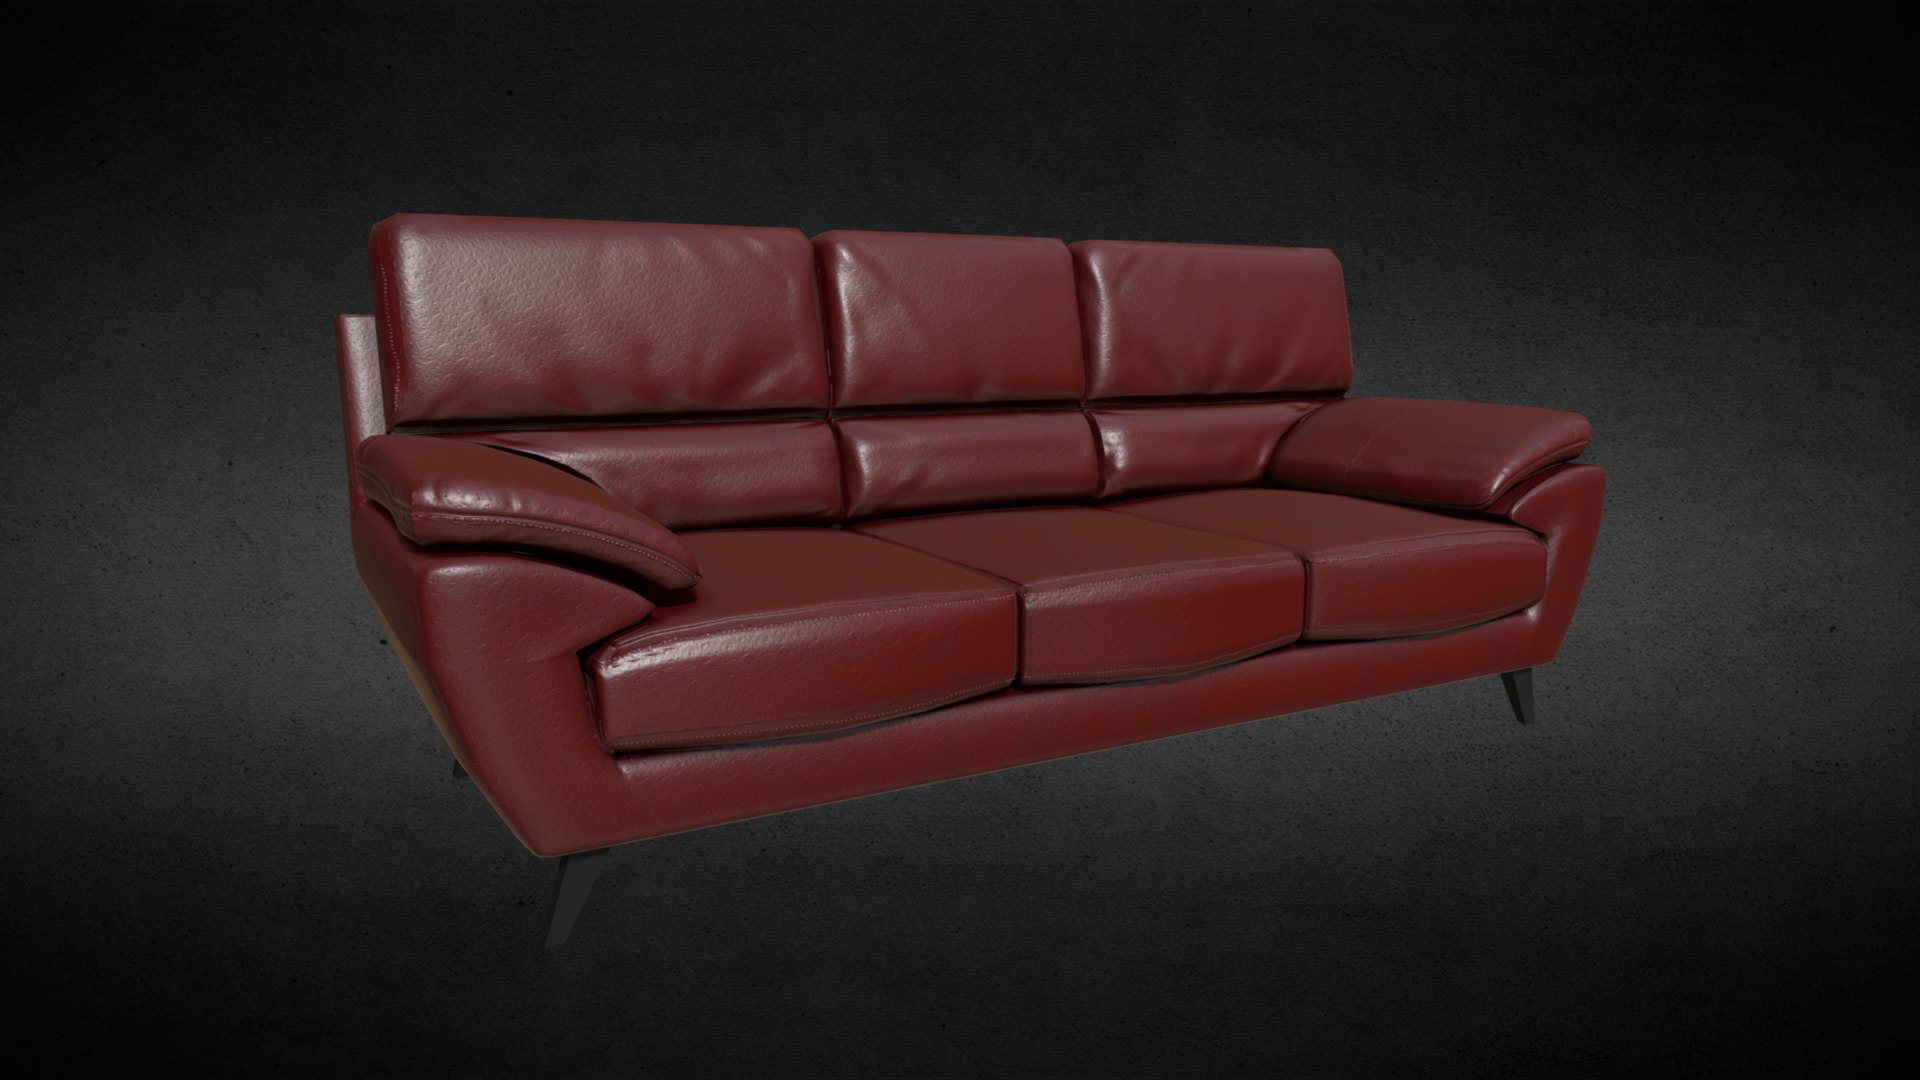 3D model Red Sofa - This is a 3D model of the Red Sofa. The 3D model is about a red leather couch.